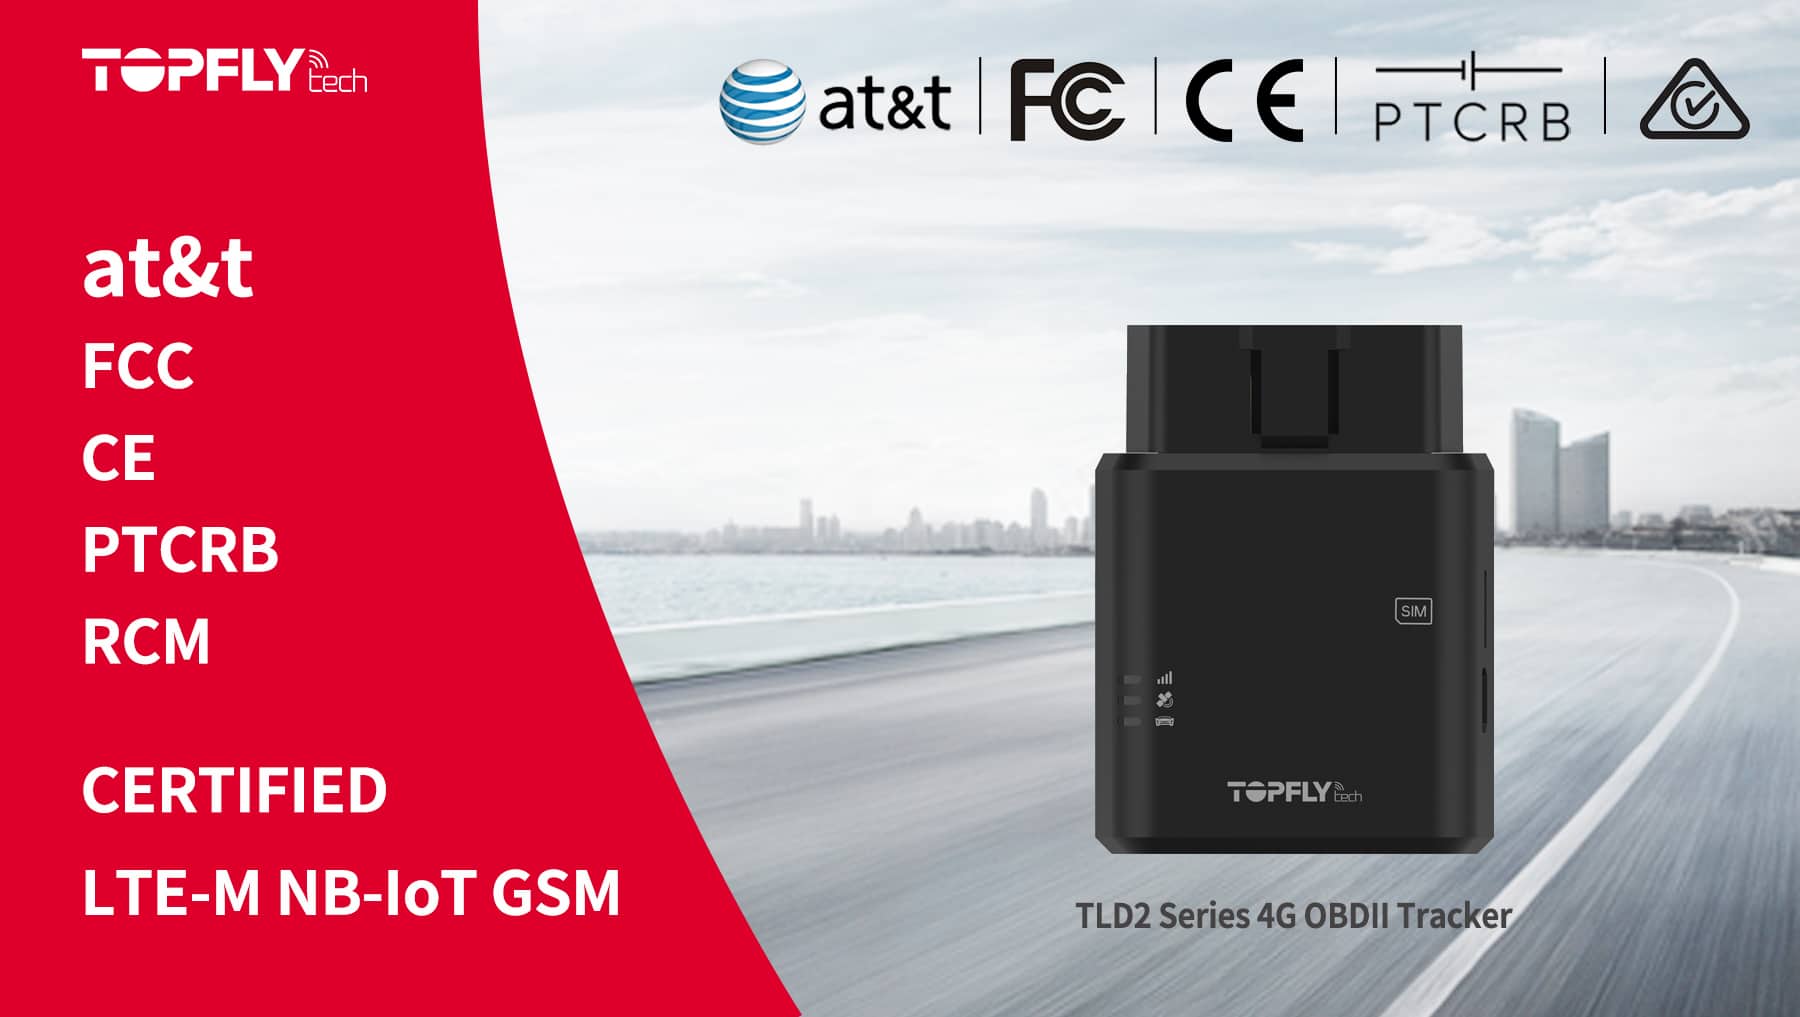 at&t Certified | TLD2 Series OBDII Tracker